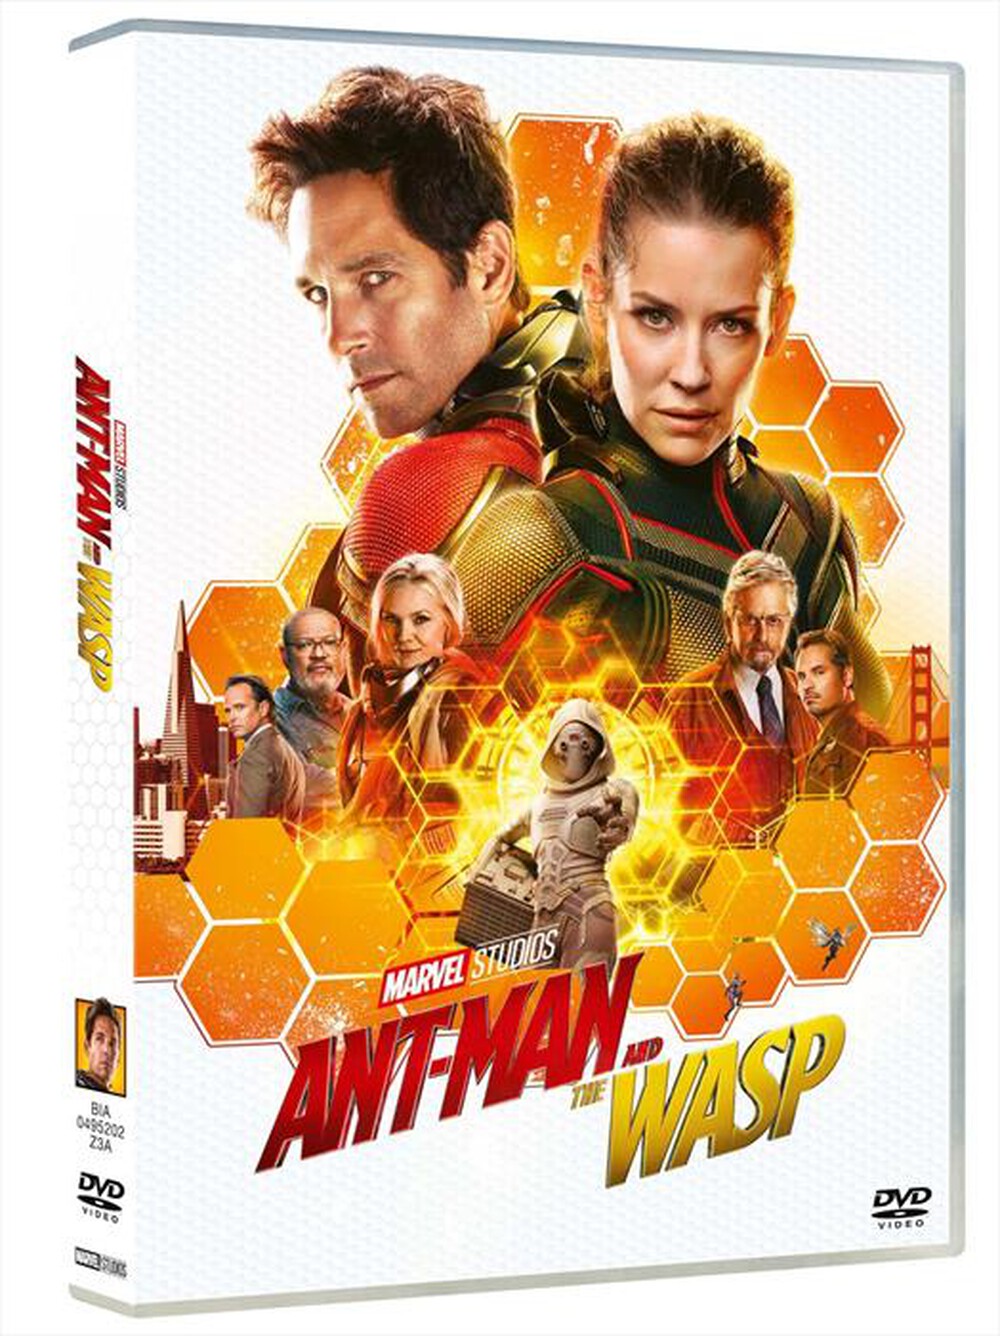 "WALT DISNEY - Ant-Man And The Wasp"